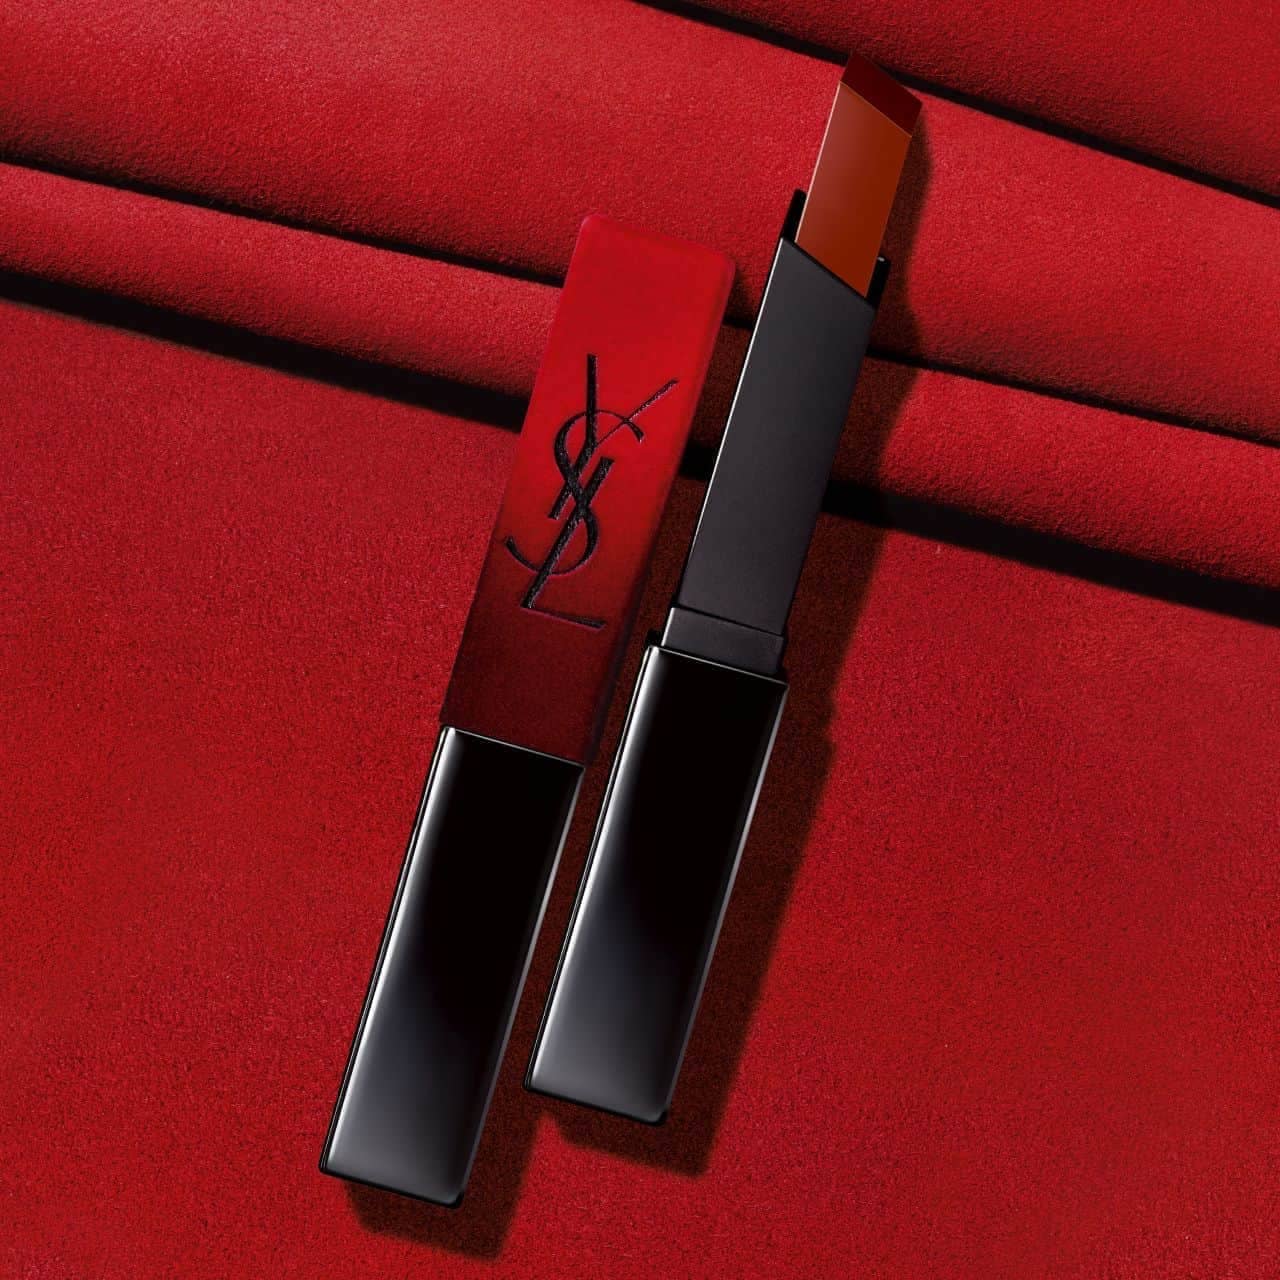 YSL "Rouge Pur Couture The Slim Velvet Radical Collector".